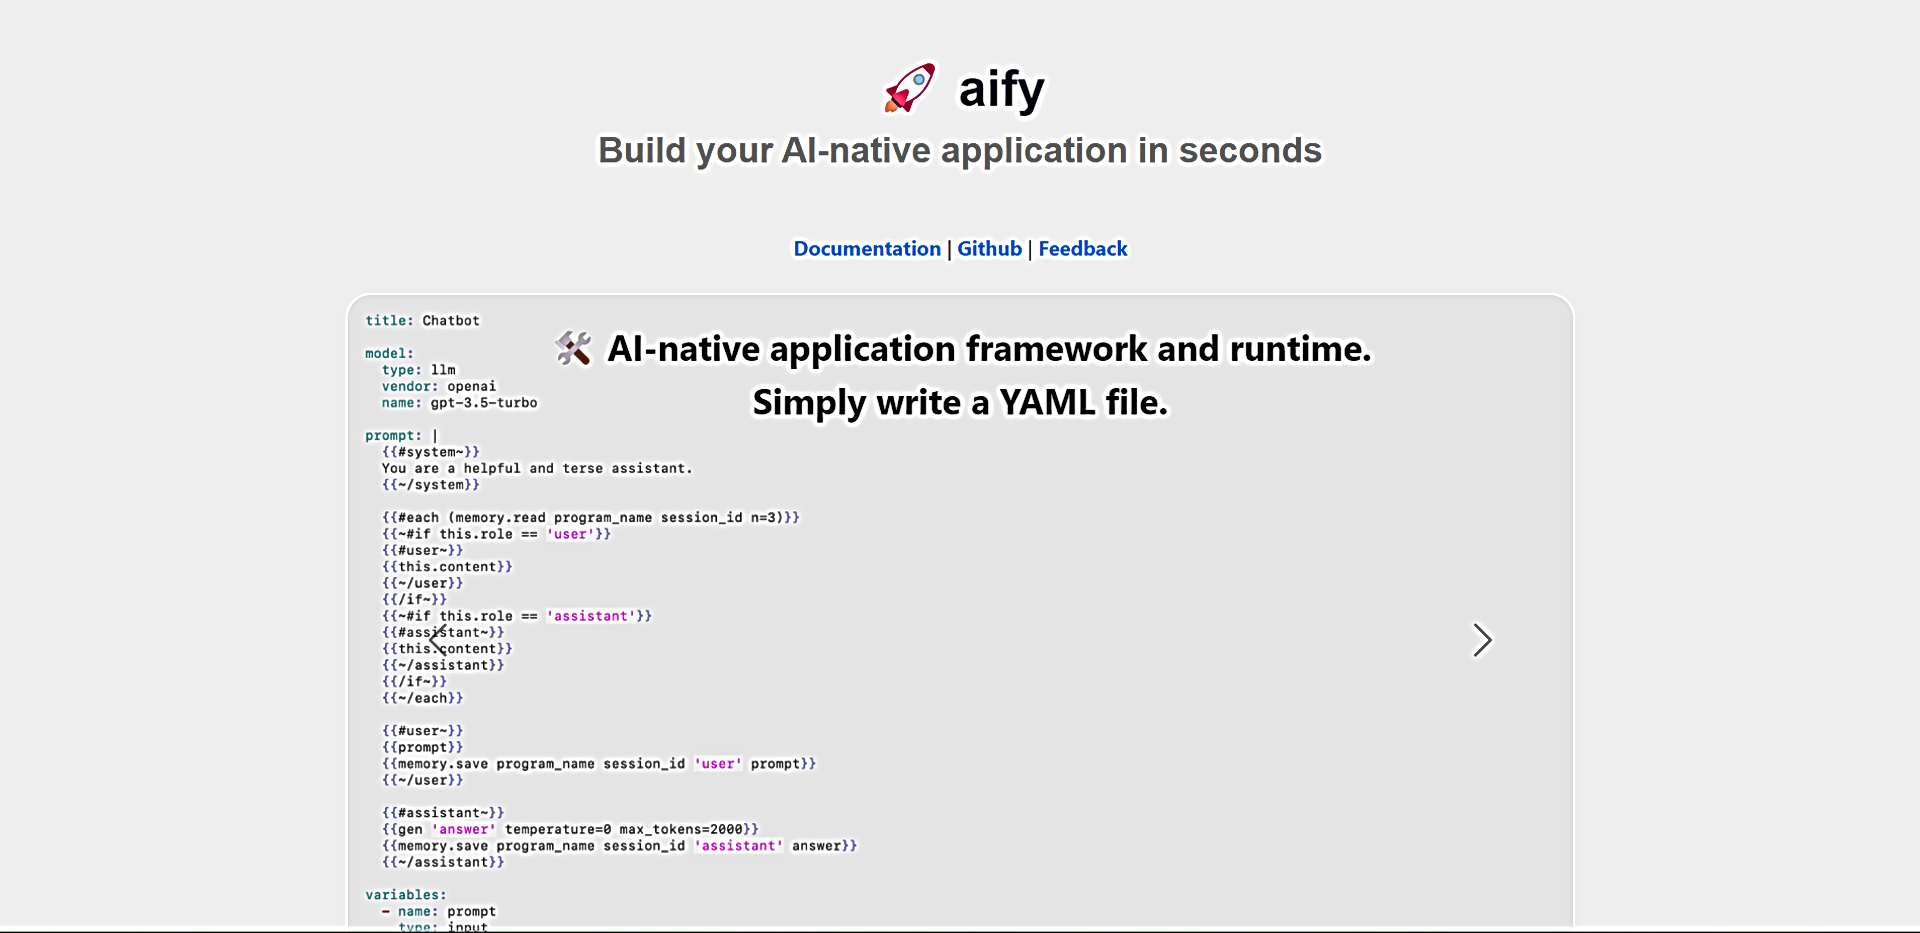 Aify featured